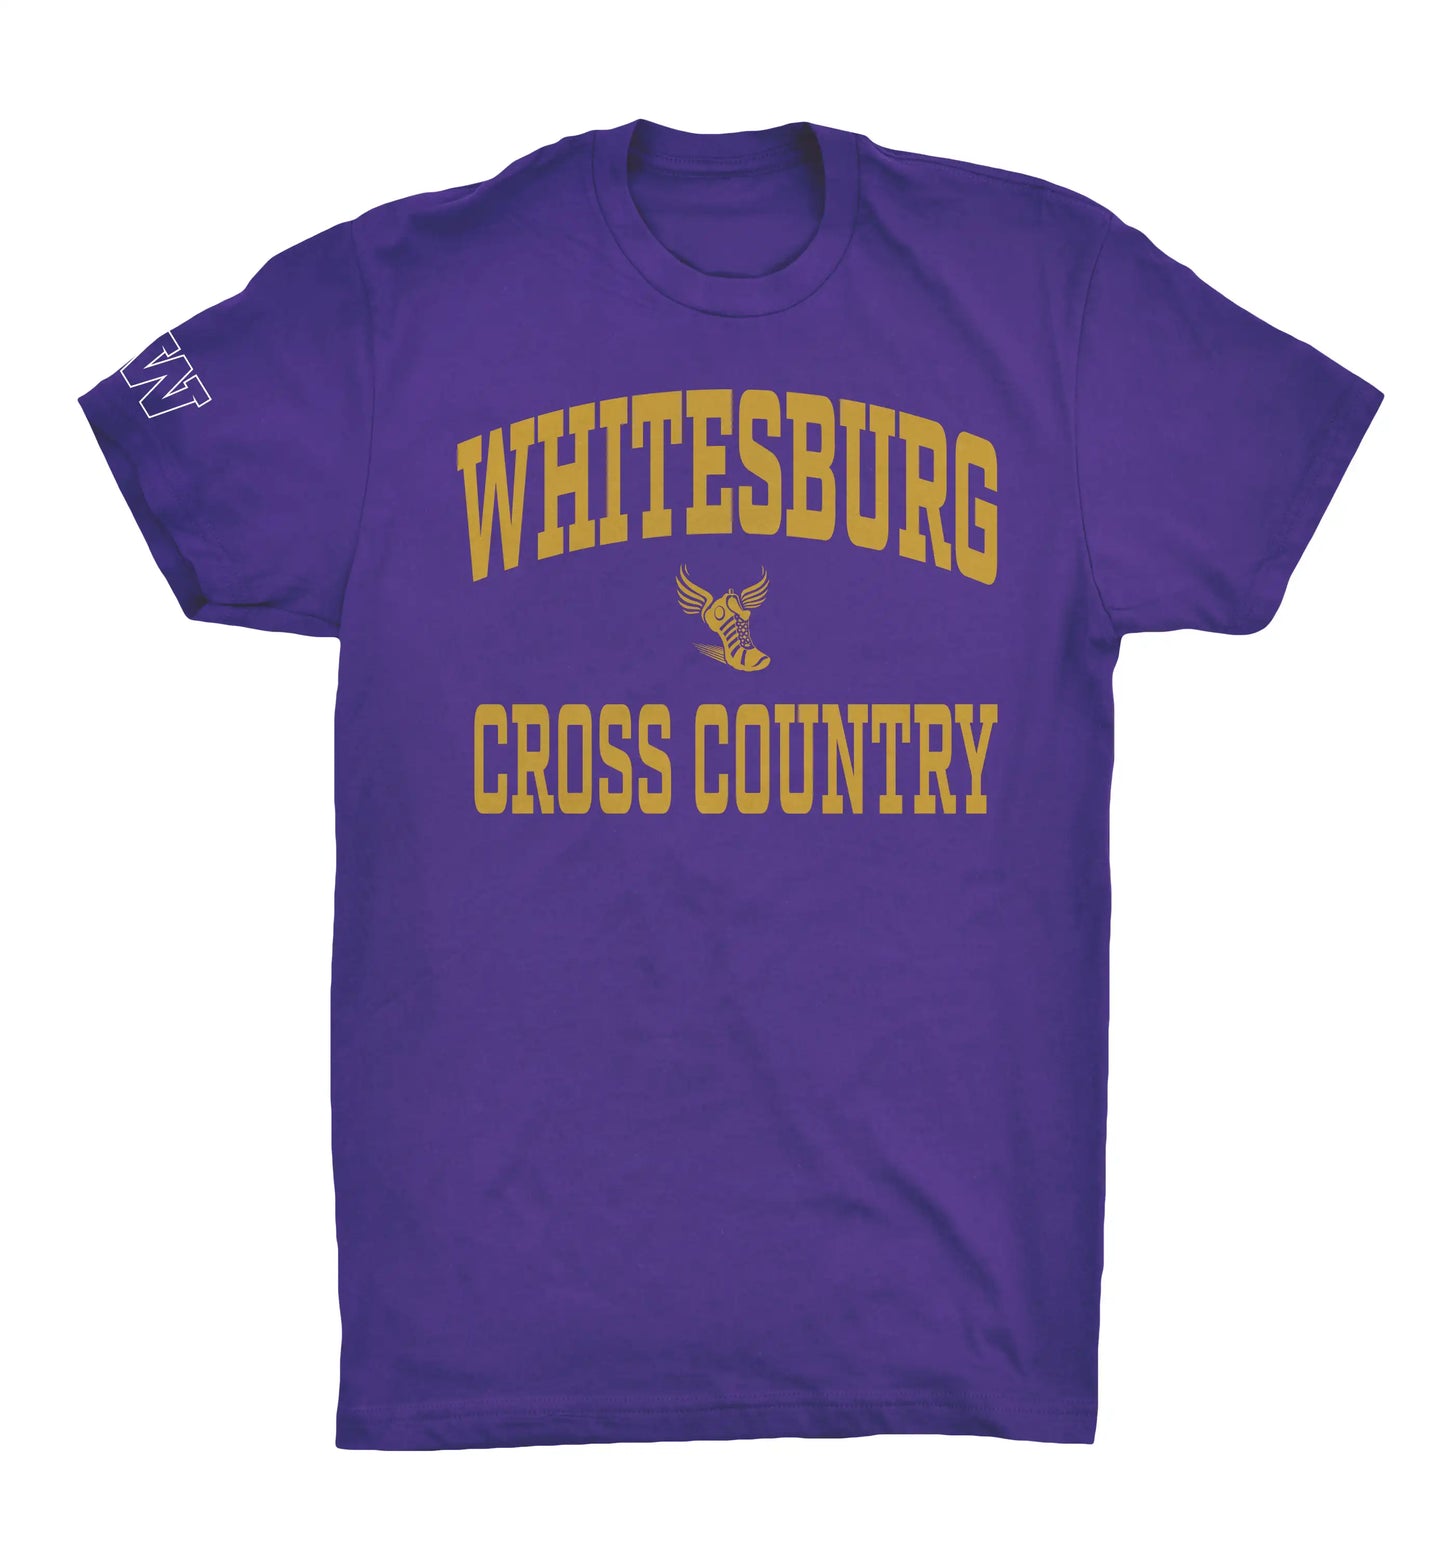 CROSS COUNTRY - Collegiate Letters Tshirt